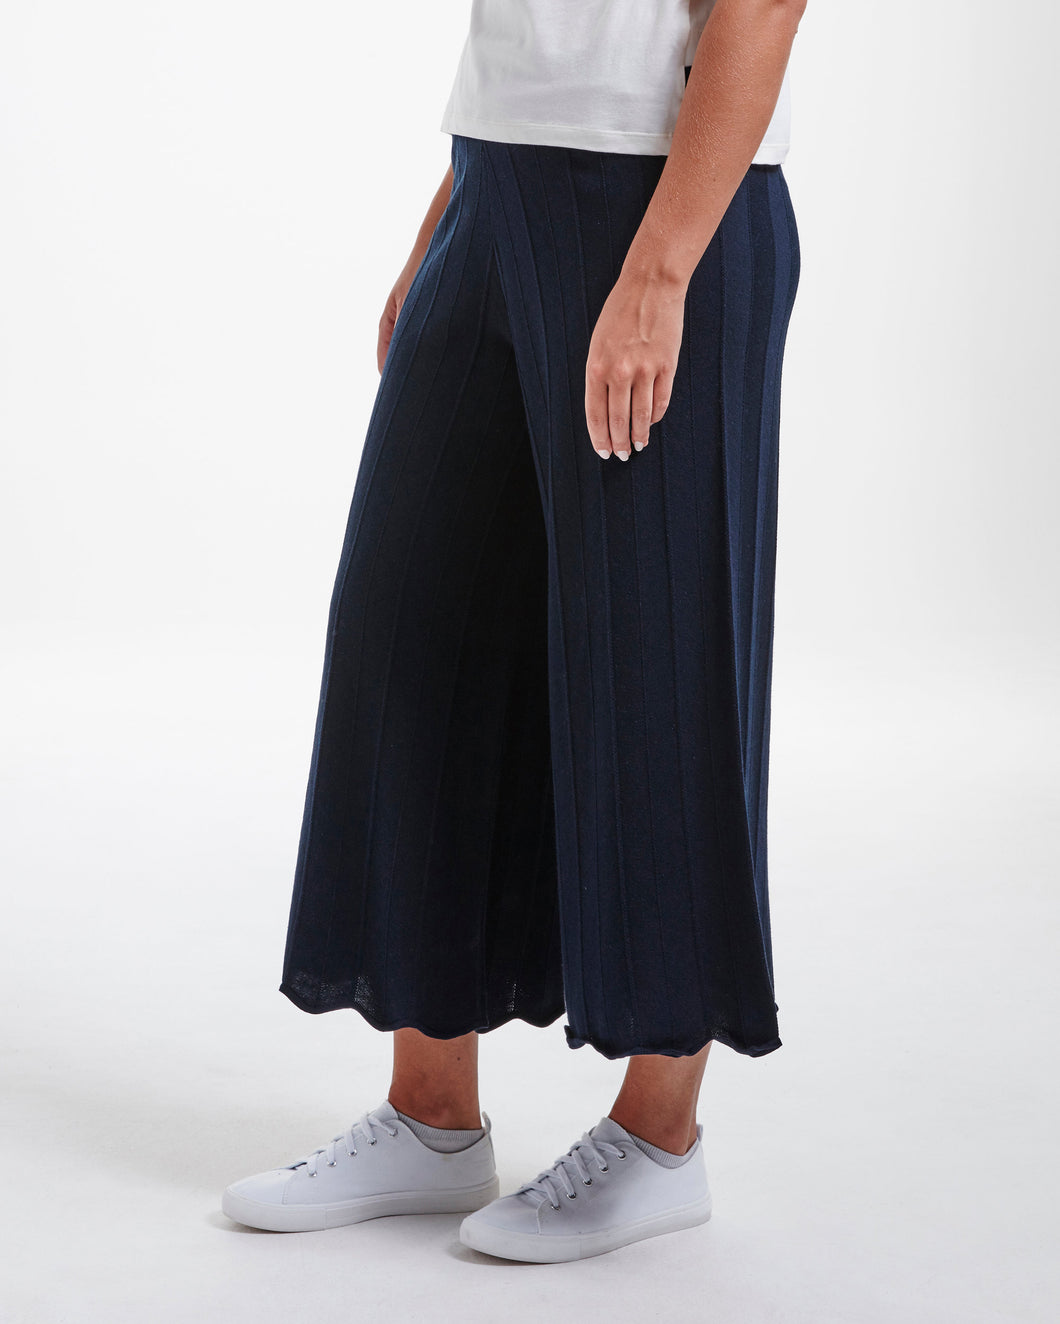 Buy Black Culottes Women Pants  Culottes Pants for Women  Girls  Damask  Printed Culottes for Ladies  Culottes Shorts for Women  Girls  Trendy   Fashionable  Knee Length